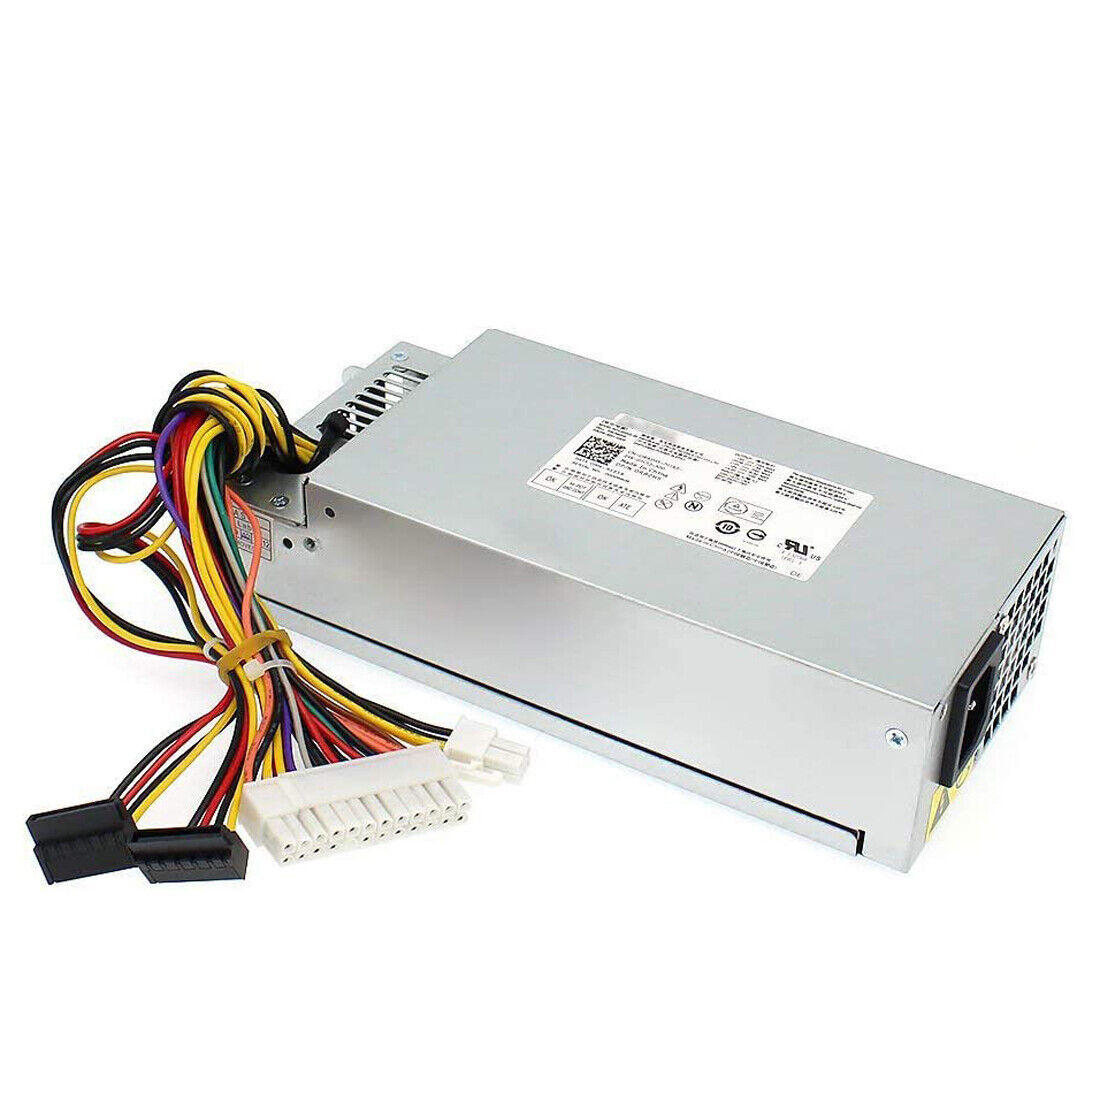 New Power Supply 220W for Dell R82H5 R5RV4 RTTPJ FXV31 M32H8 P3JW1 TTXYJ 4C9X9